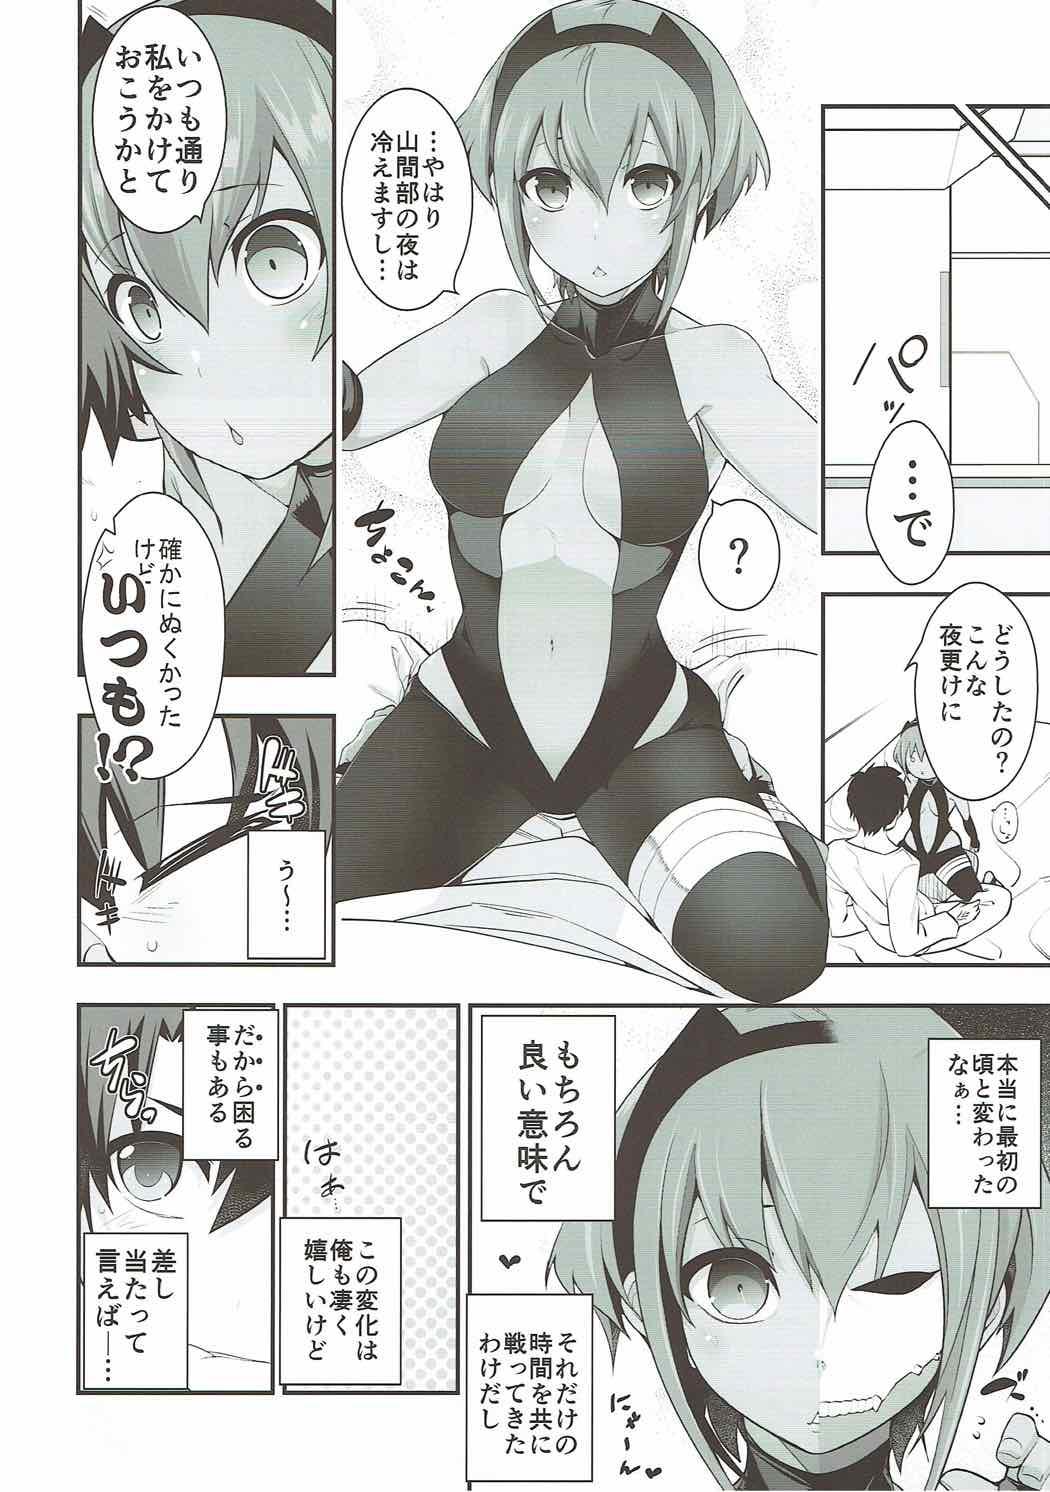 Bed Natsuita - Fate grand order Guys - Page 5